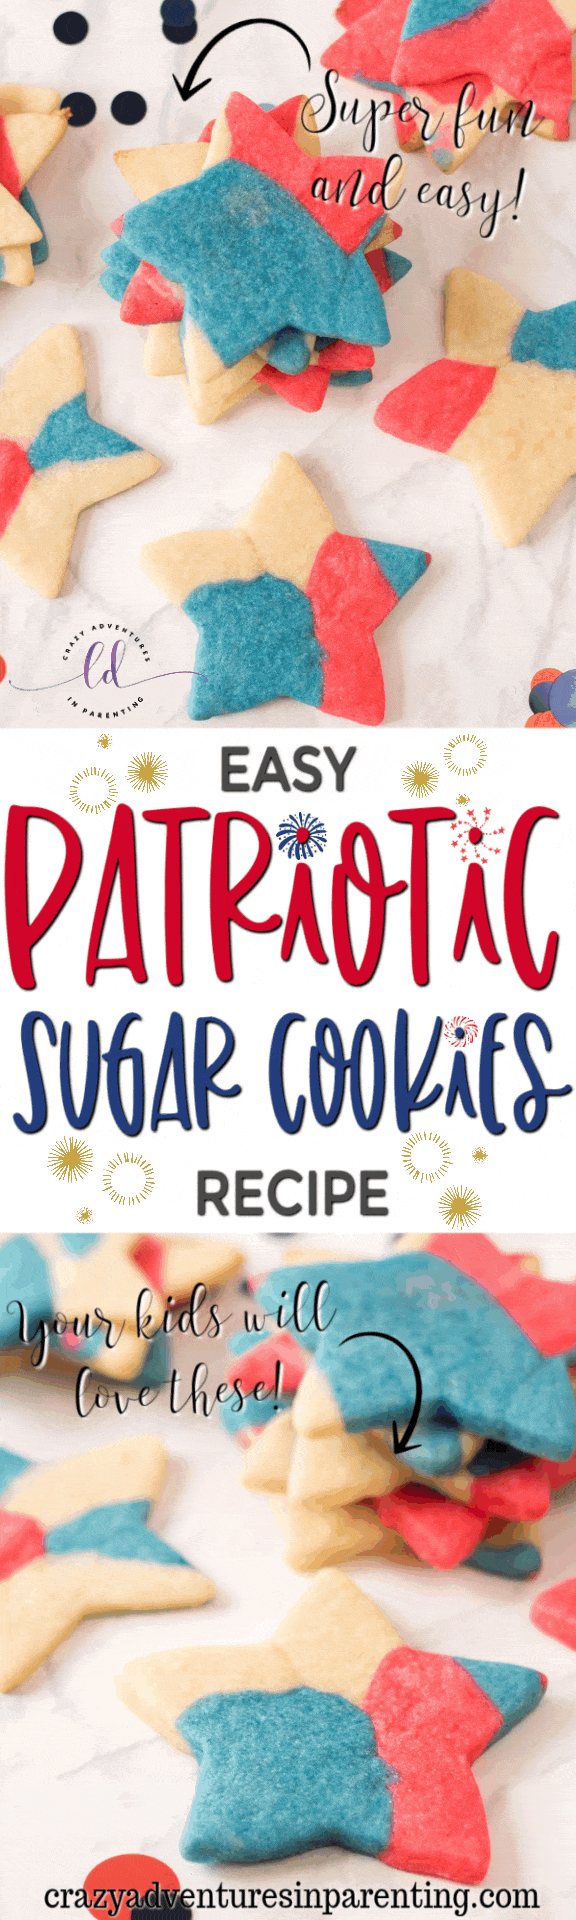 Fun and Easy Patriotic Sugar Cookies Recipe for Memorial Day, Fourth of July, Labor Day, Flag Day, and more!